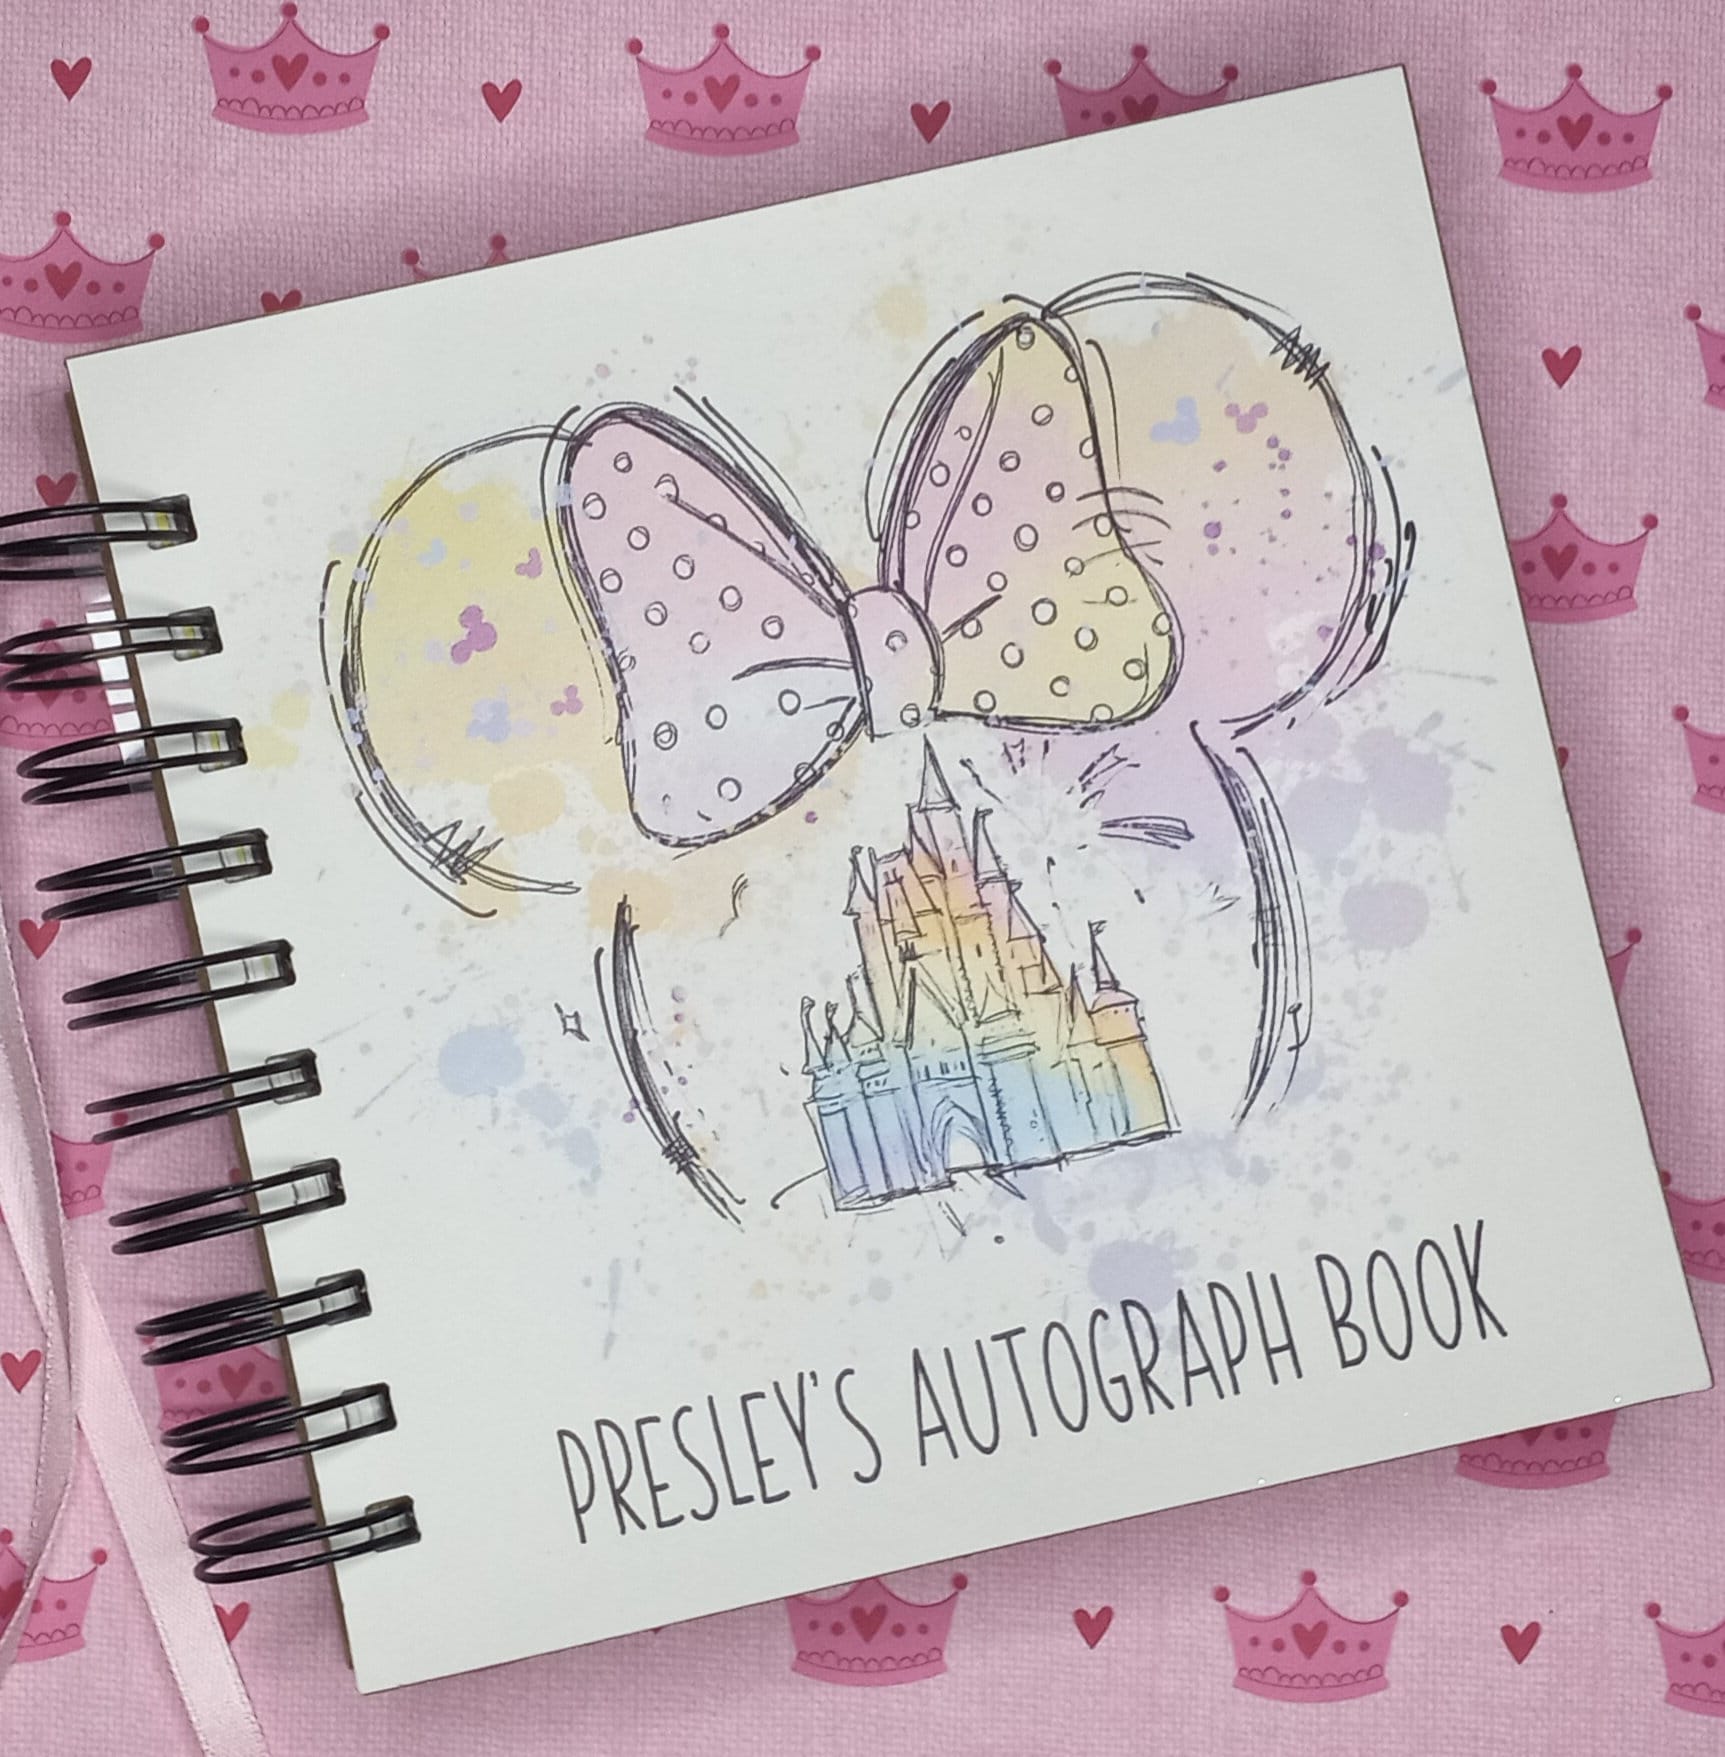 Autograph Book: Signature & Photo Book, Blank Unlined Memory Album Photo,  To Collect Signatures with Selfies or Pictures of Your favorite Characters   of your Trips Memories or Family Vacations: Design, Elegant